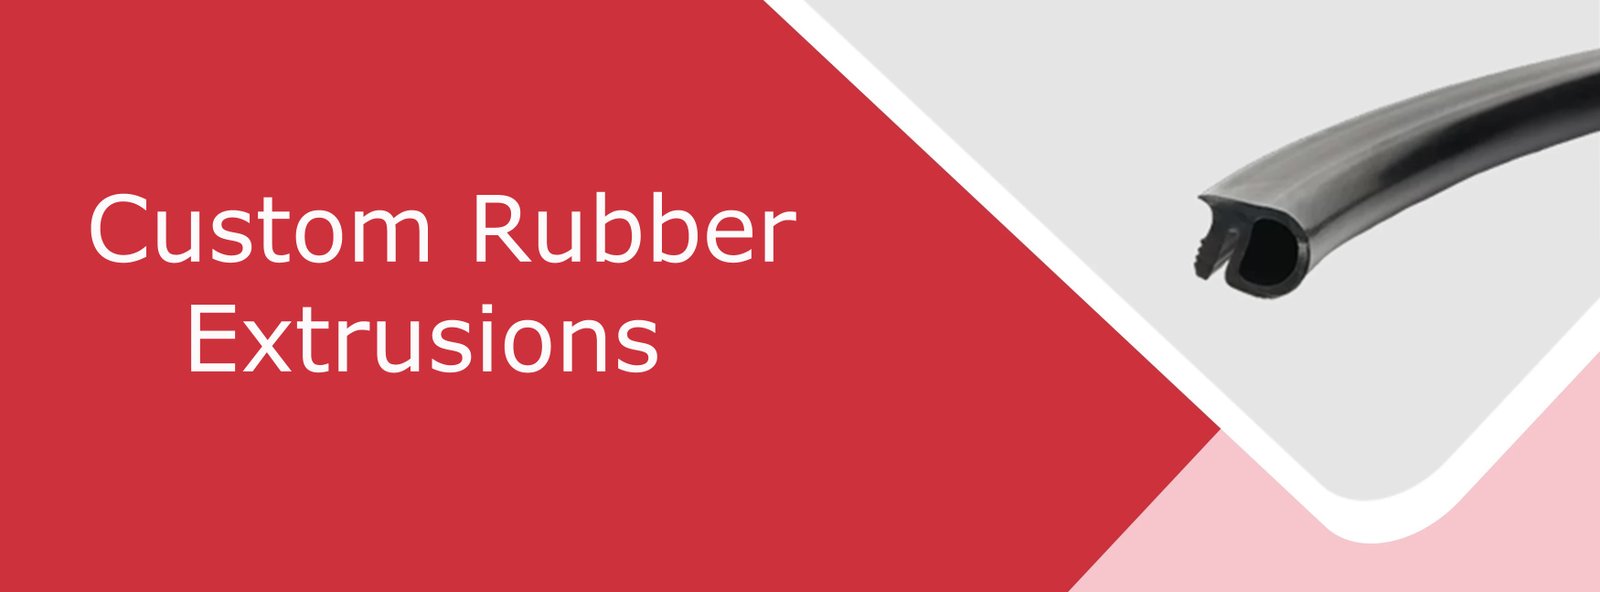 Custom Rubber Extrusions Cover Image